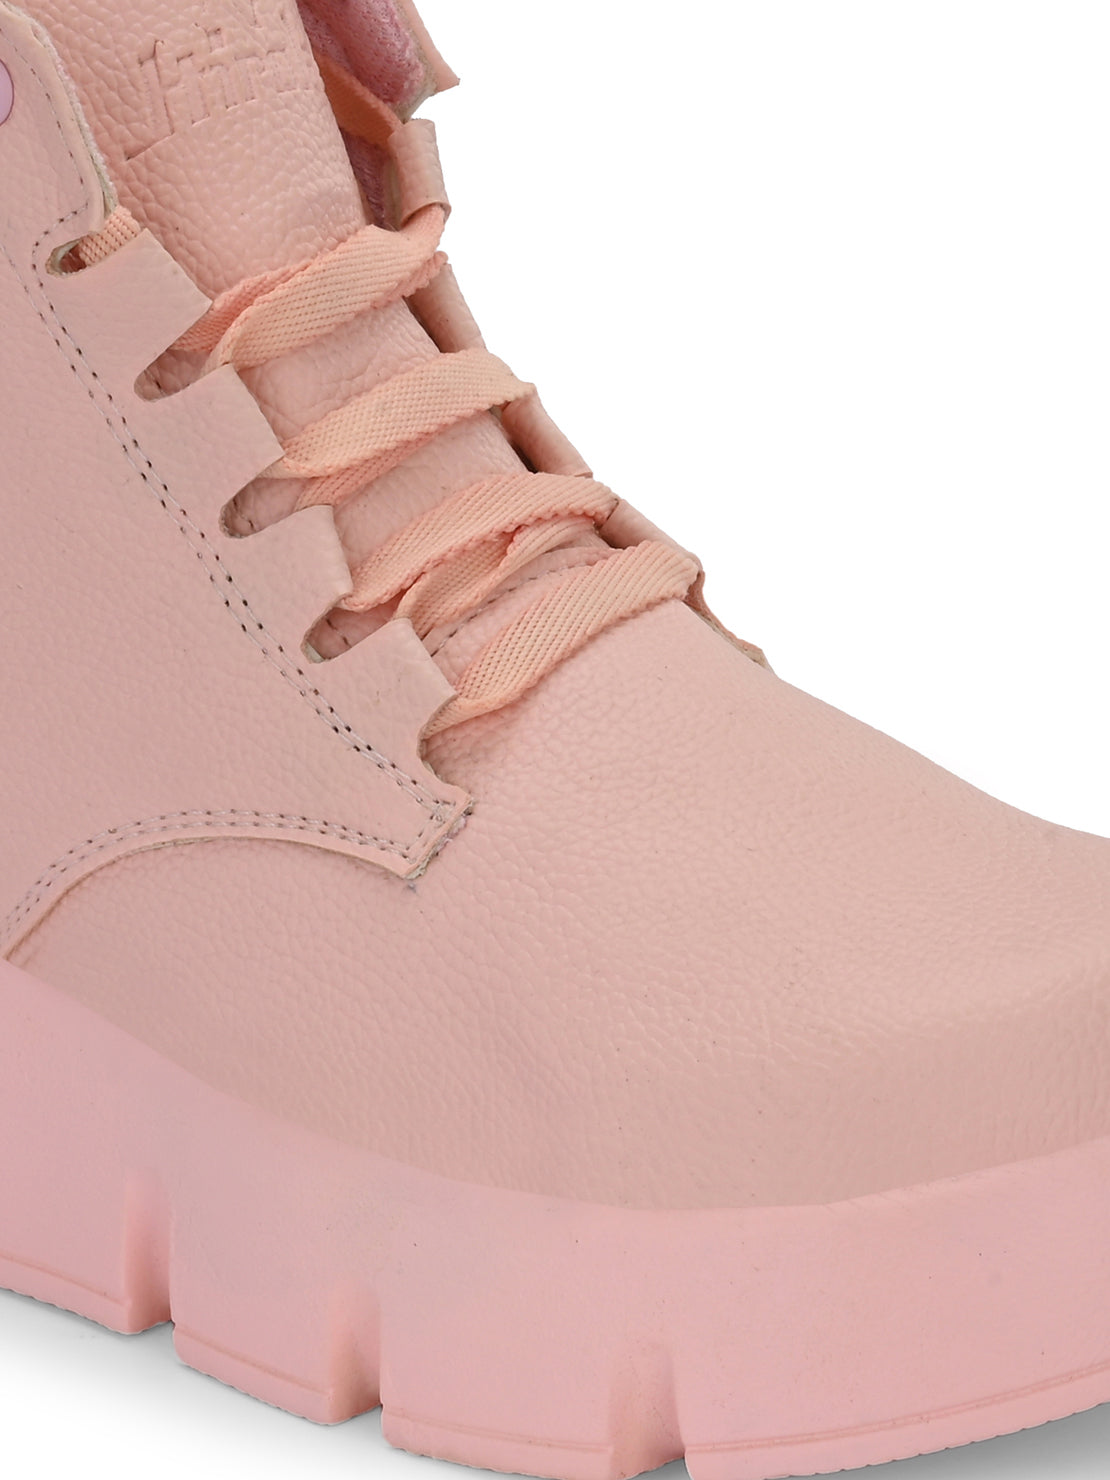 Hirolas® Women Pink Chunky Casual Lace-Up Ankle HighBoots (HRLWF18PNK)